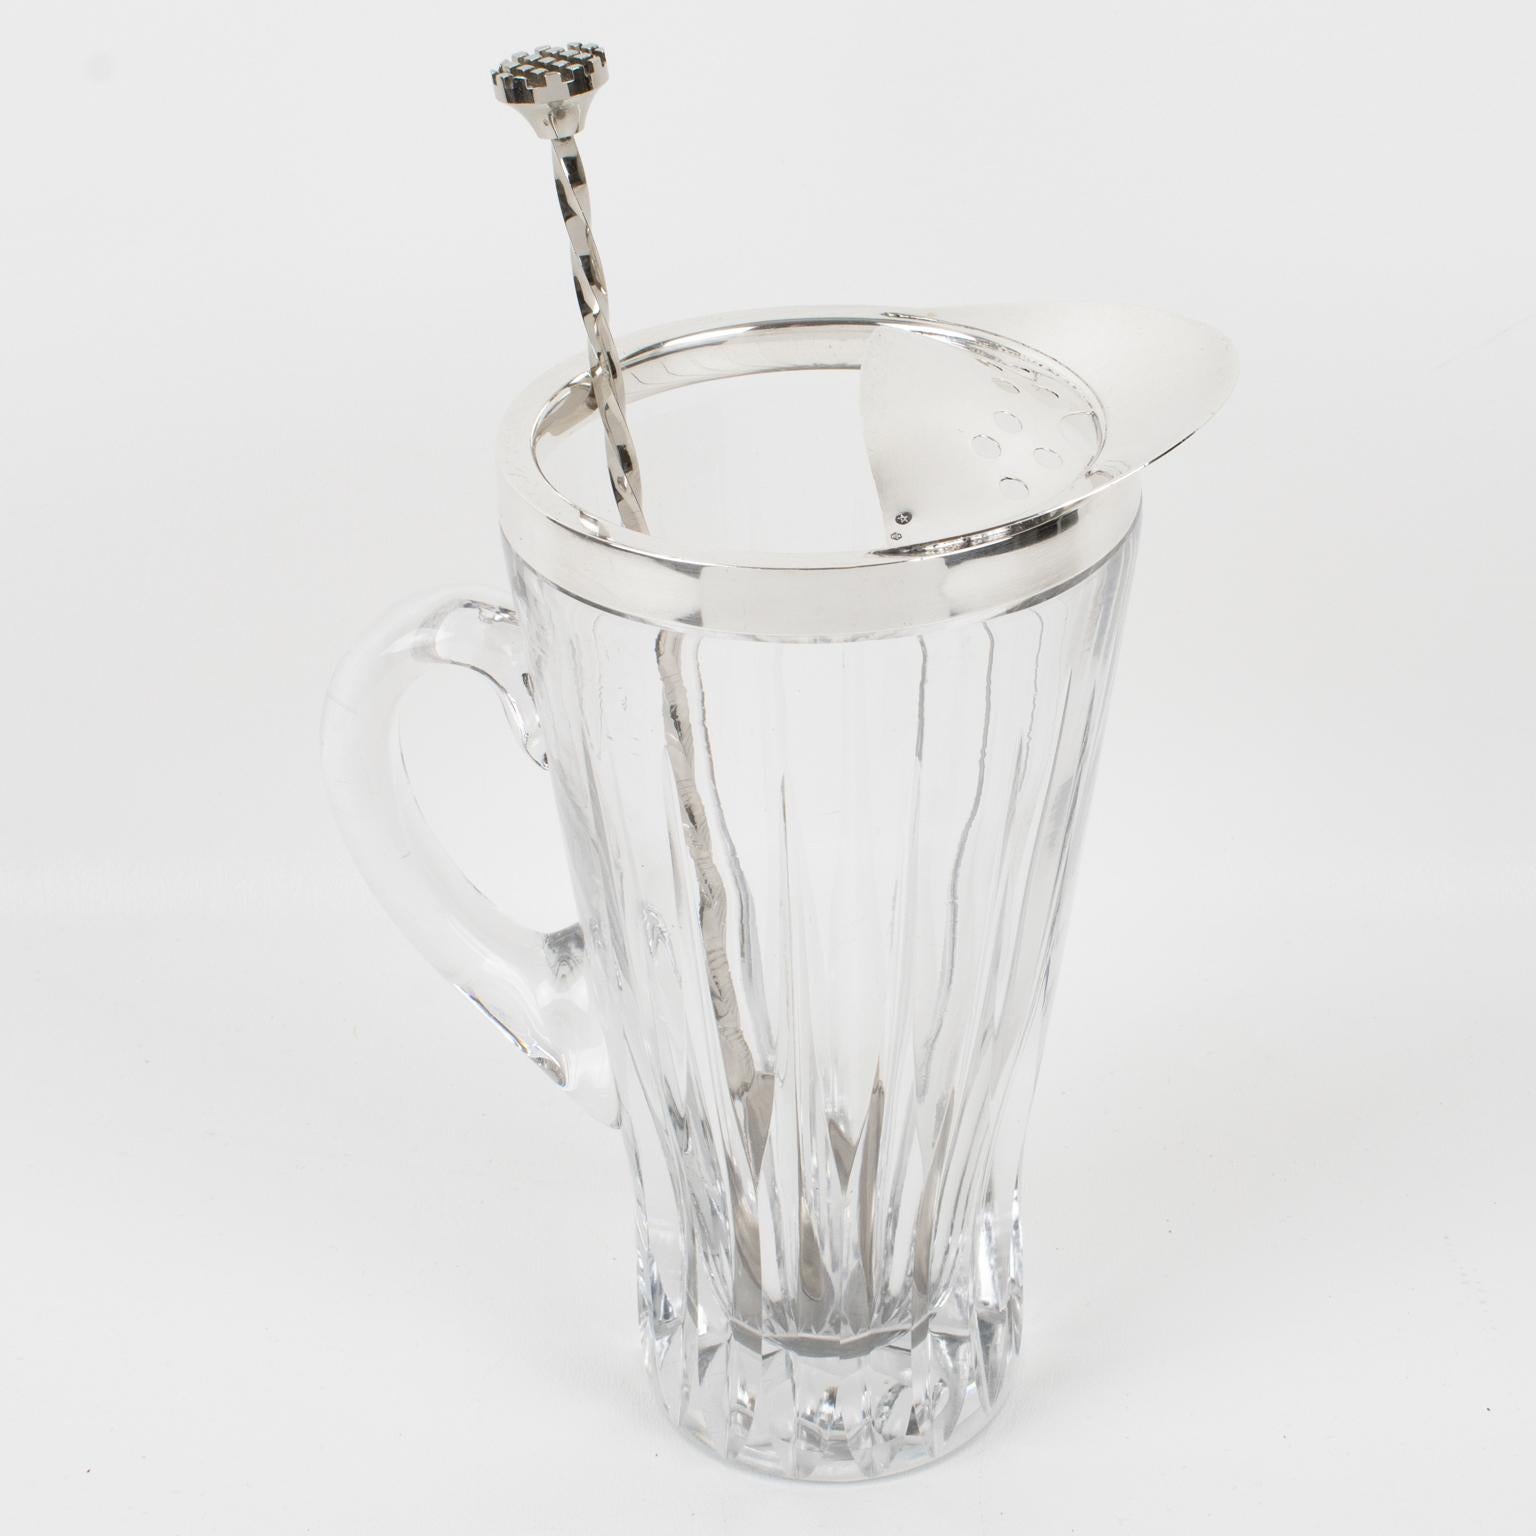 Mid-20th Century Silver Plate and Crystal Barware Cocktail Martini Pitcher with Stirrer